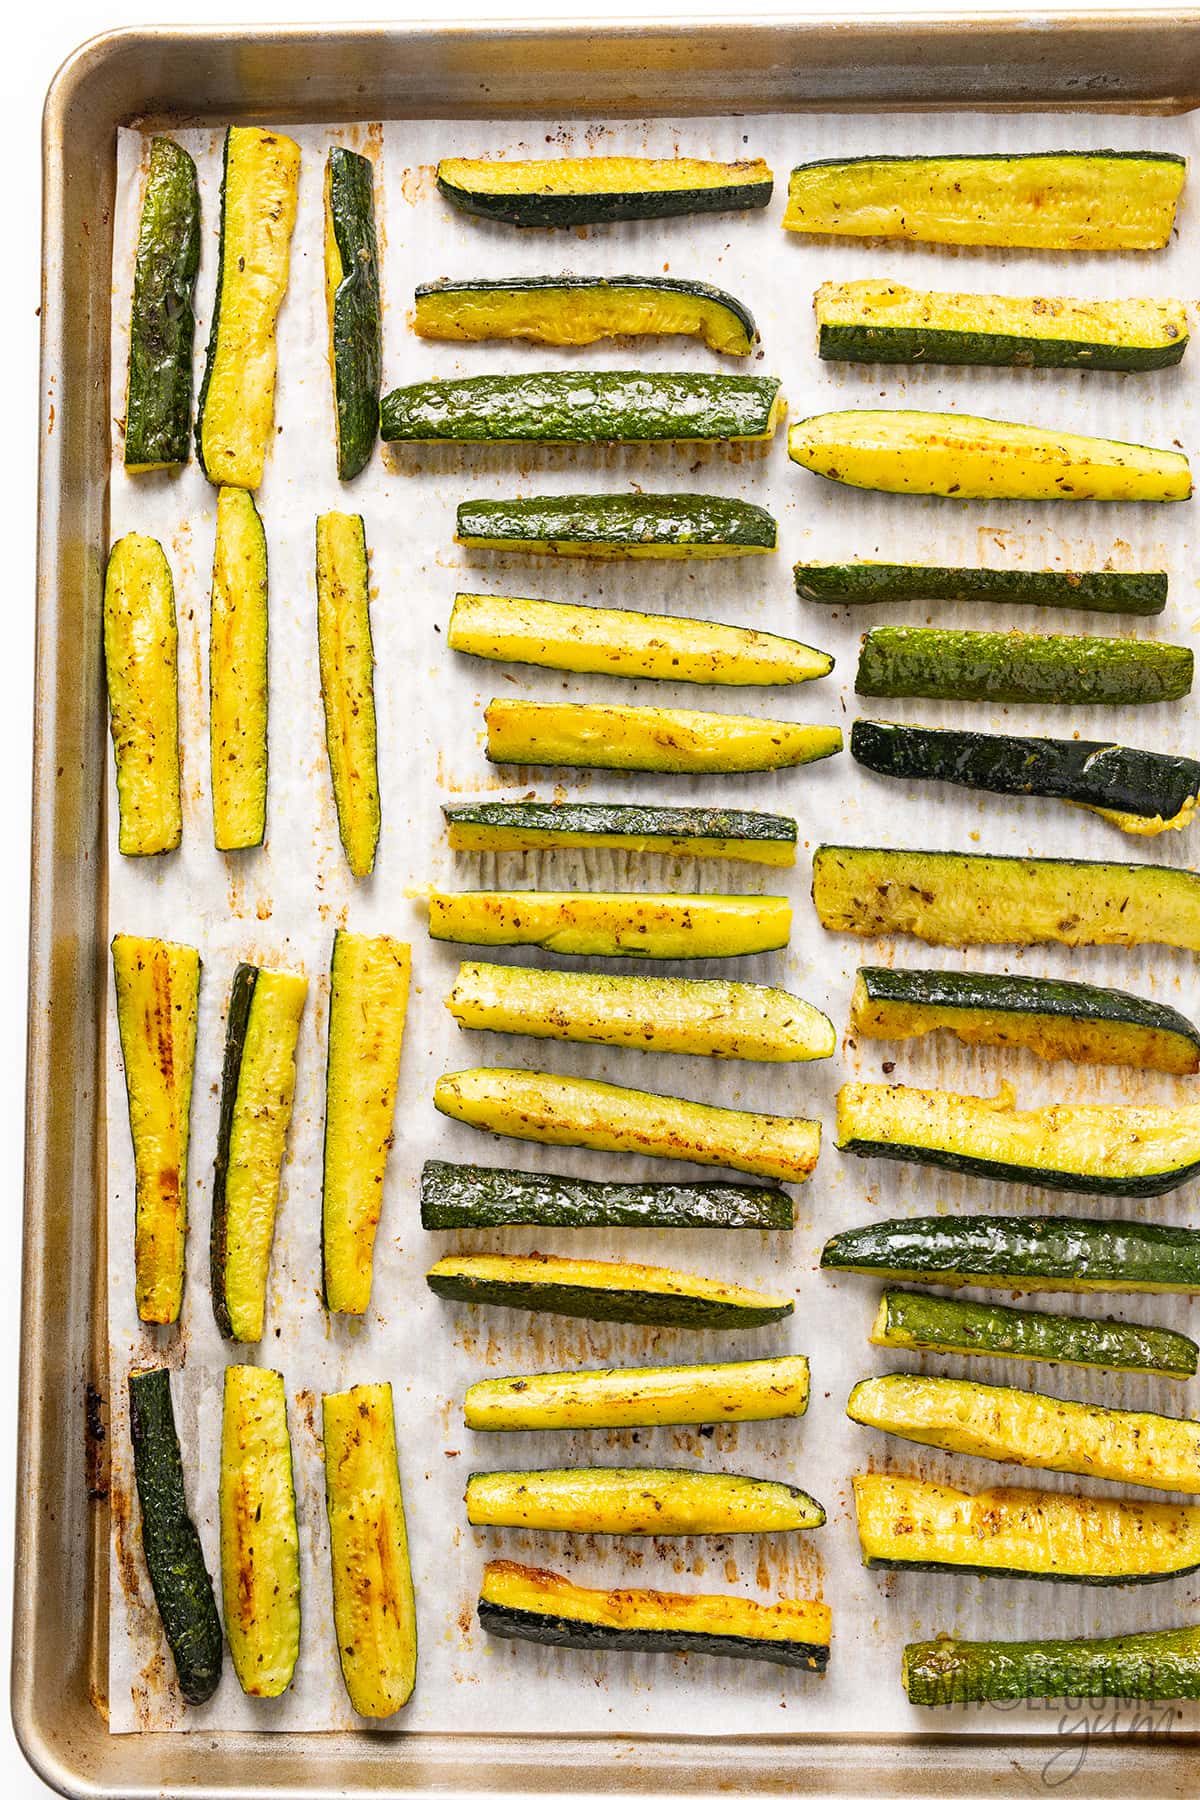 Roasting zucchini in the oven comes out looking like this.